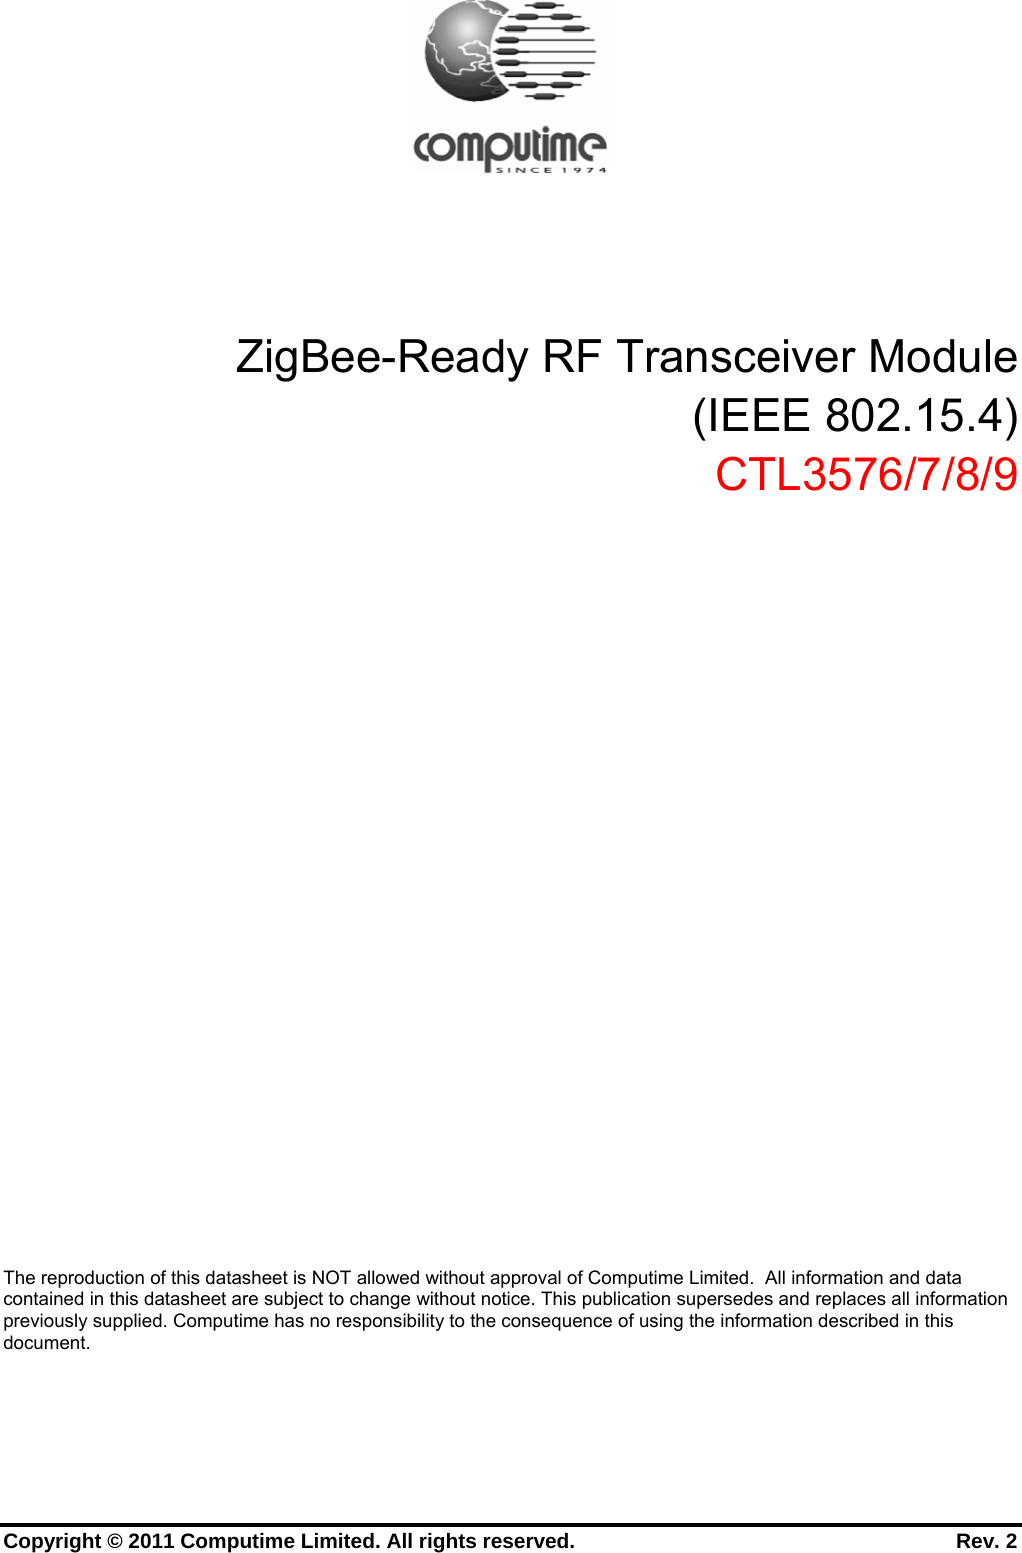      Copyright © 2011 Computime Limited. All rights reserved.                                                       Rev. 2          ZigBee-Ready RF Transceiver Module (IEEE 802.15.4) CTL3576/7/8/9              The reproduction of this datasheet is NOT allowed without approval of Computime Limited.  All information and data contained in this datasheet are subject to change without notice. This publication supersedes and replaces all information previously supplied. Computime has no responsibility to the consequence of using the information described in this document. 